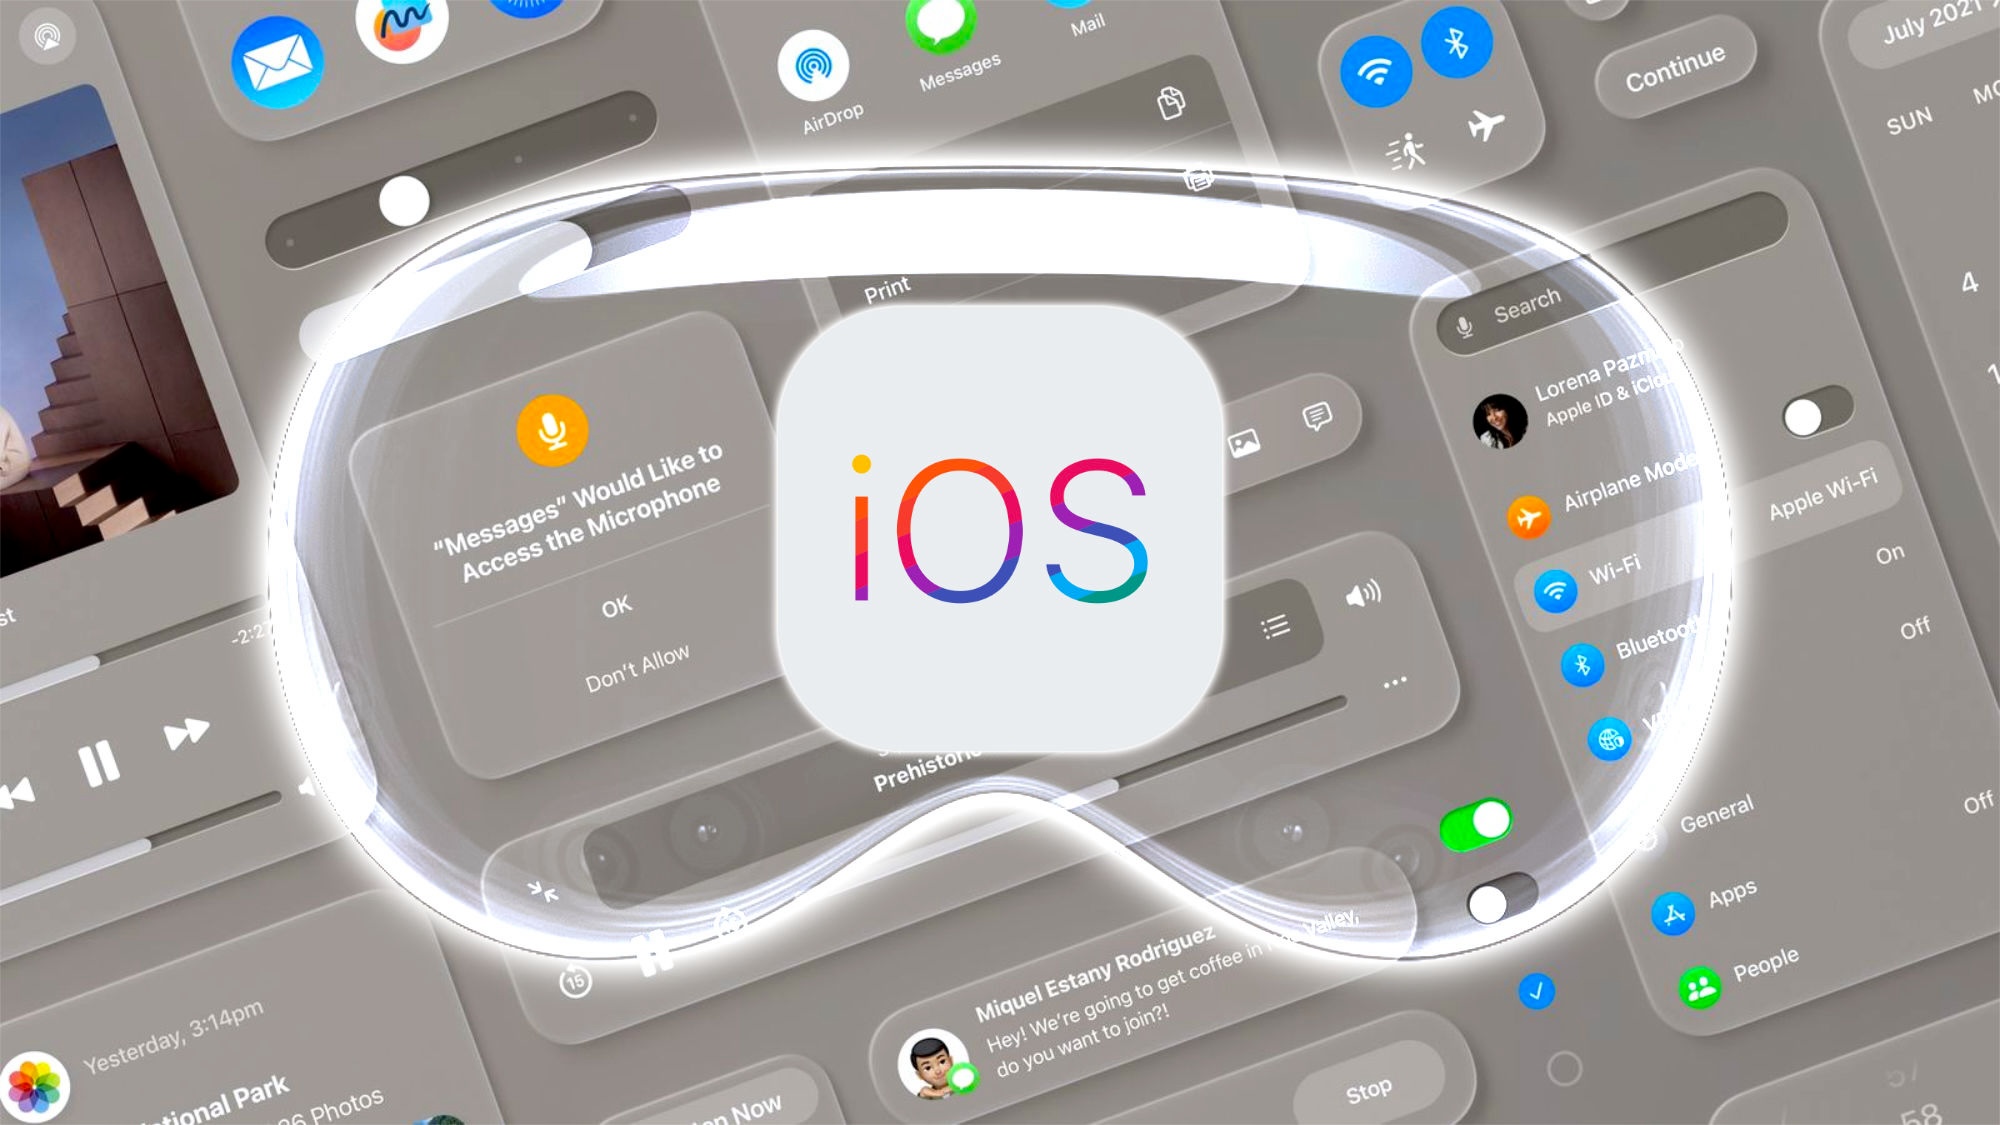 iOS 18 draws inspiration from visionOS: new design rumored for iPhone